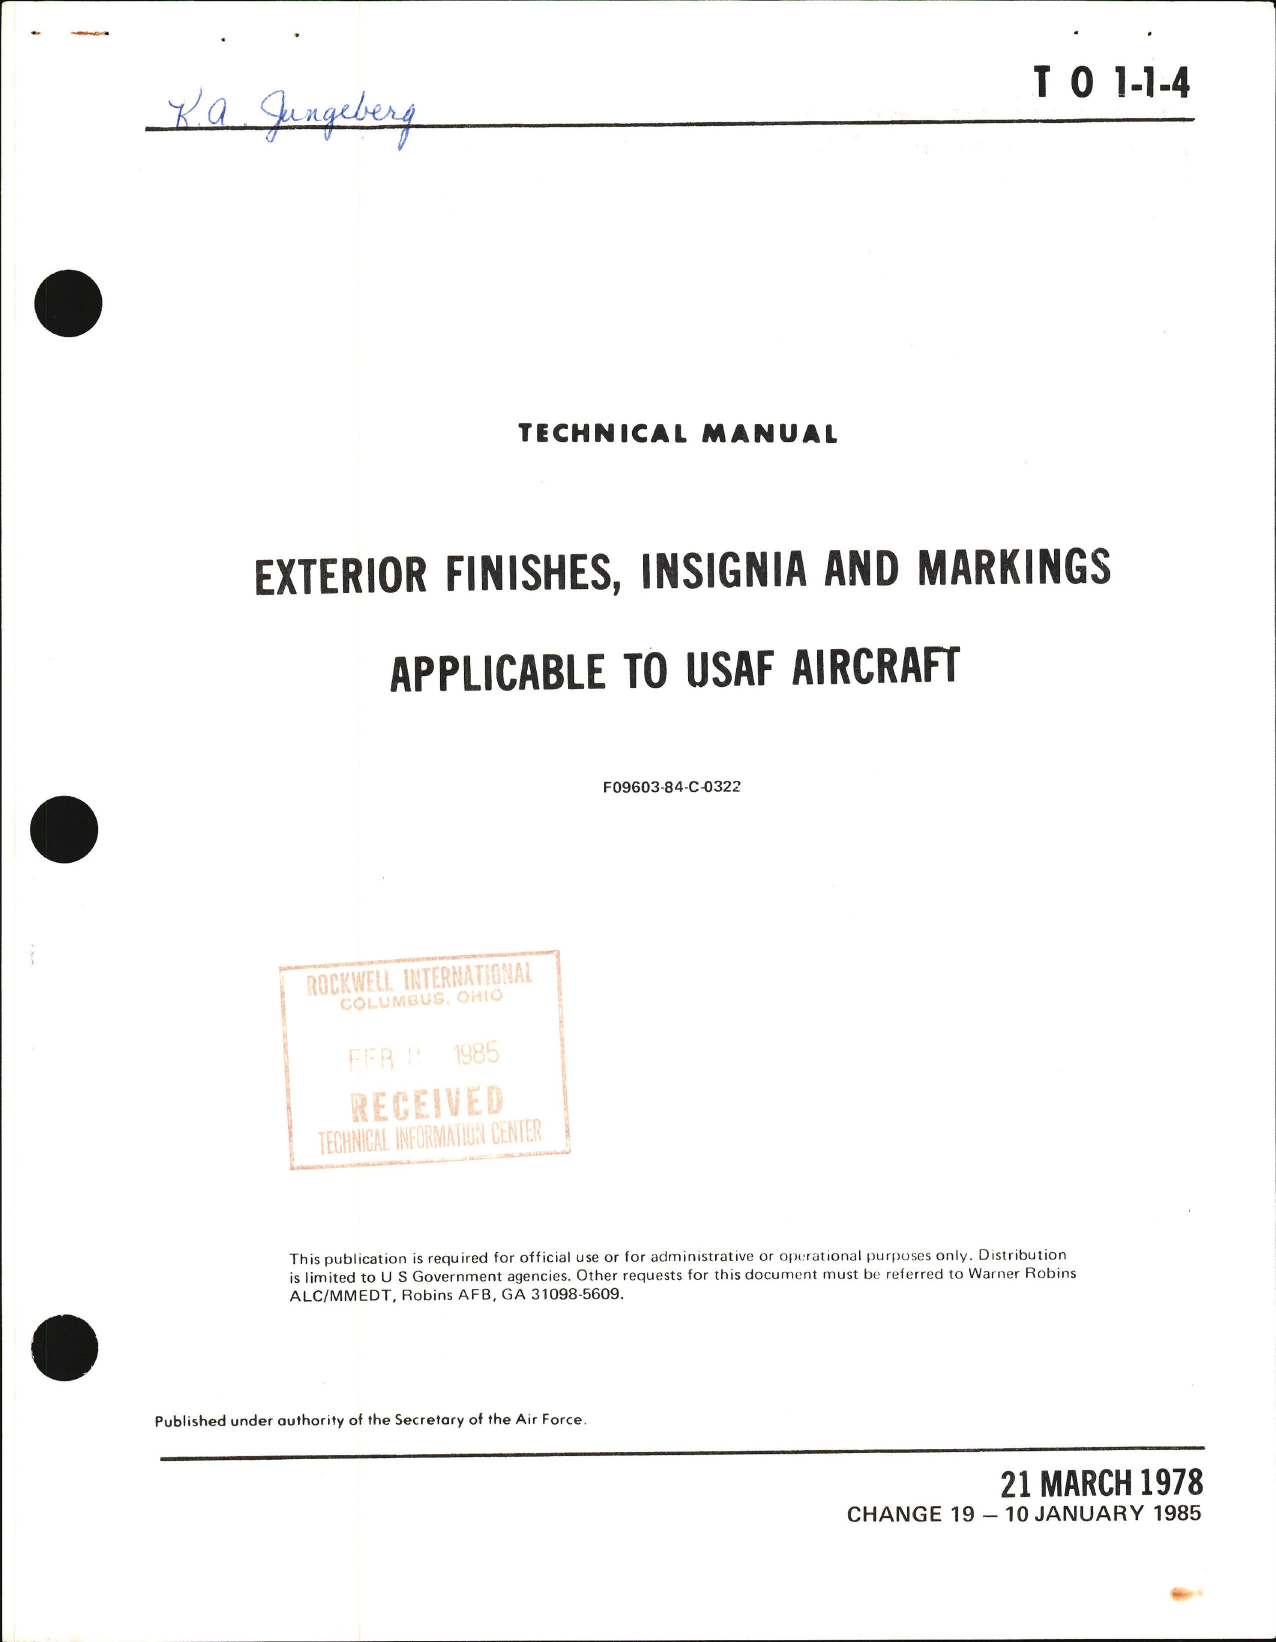 Sample page 1 from AirCorps Library document: Exterior Finishes, Insignia and Markings for USAF Aircraft - Change - 19